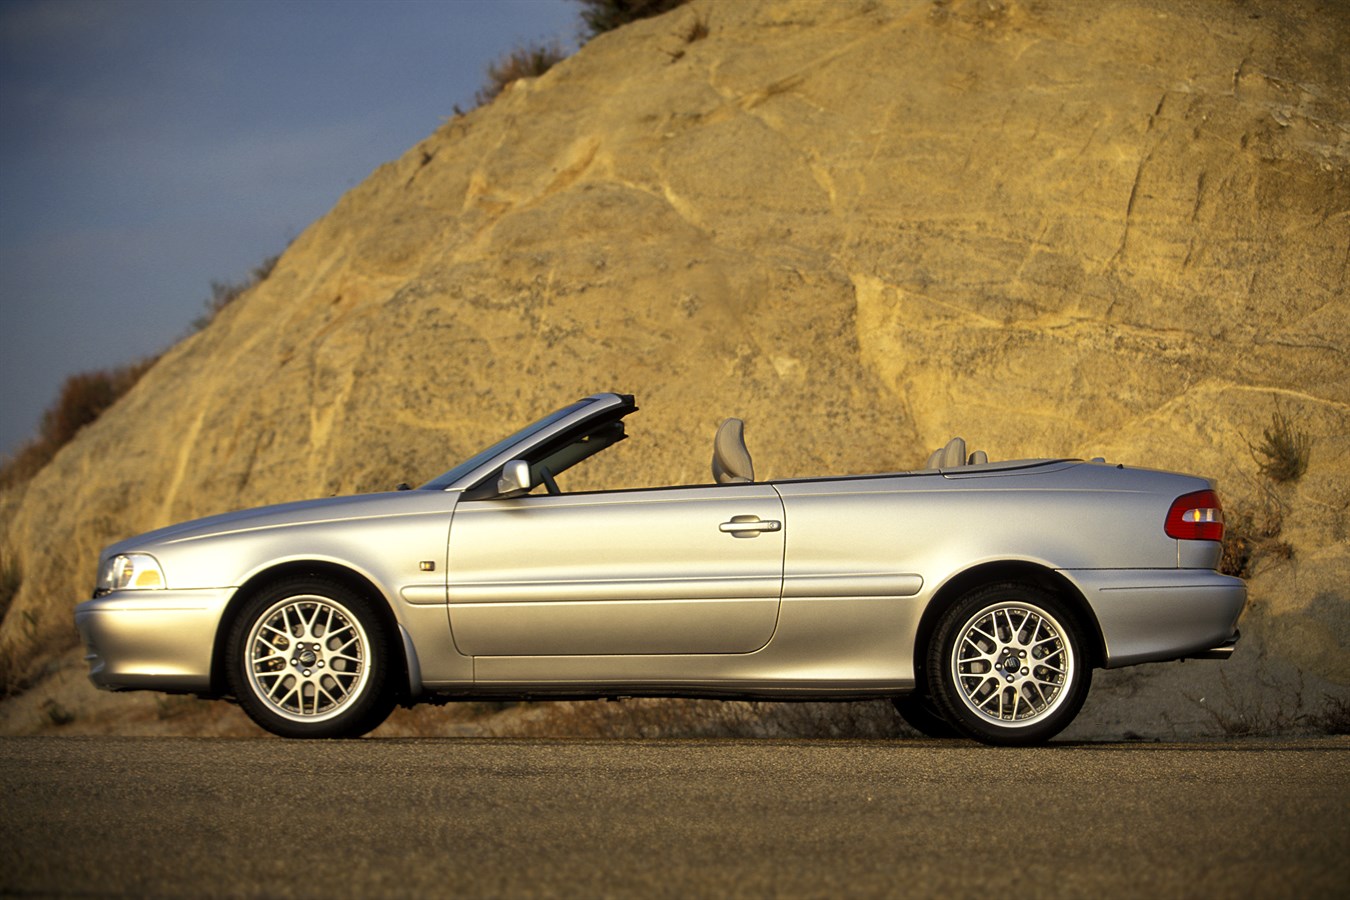 Volvo C70 Convertible Parked